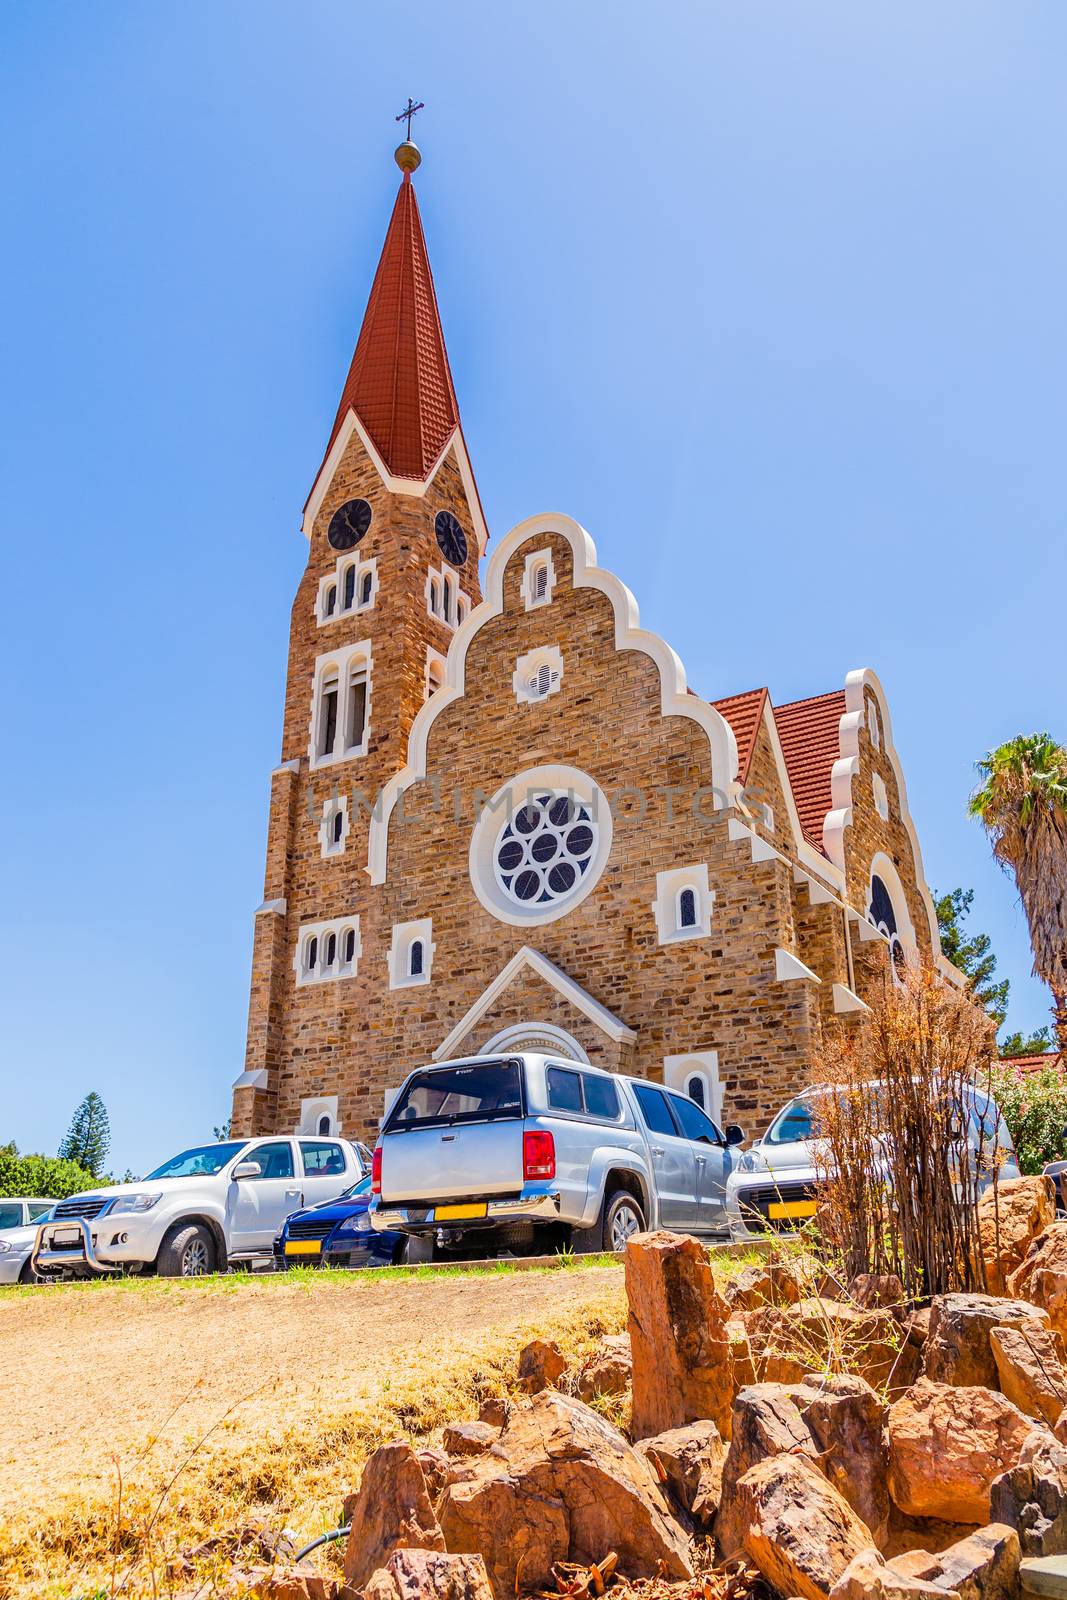 Luteran Christ Church and road with cars in front, Windhoek, Nam by ambeon